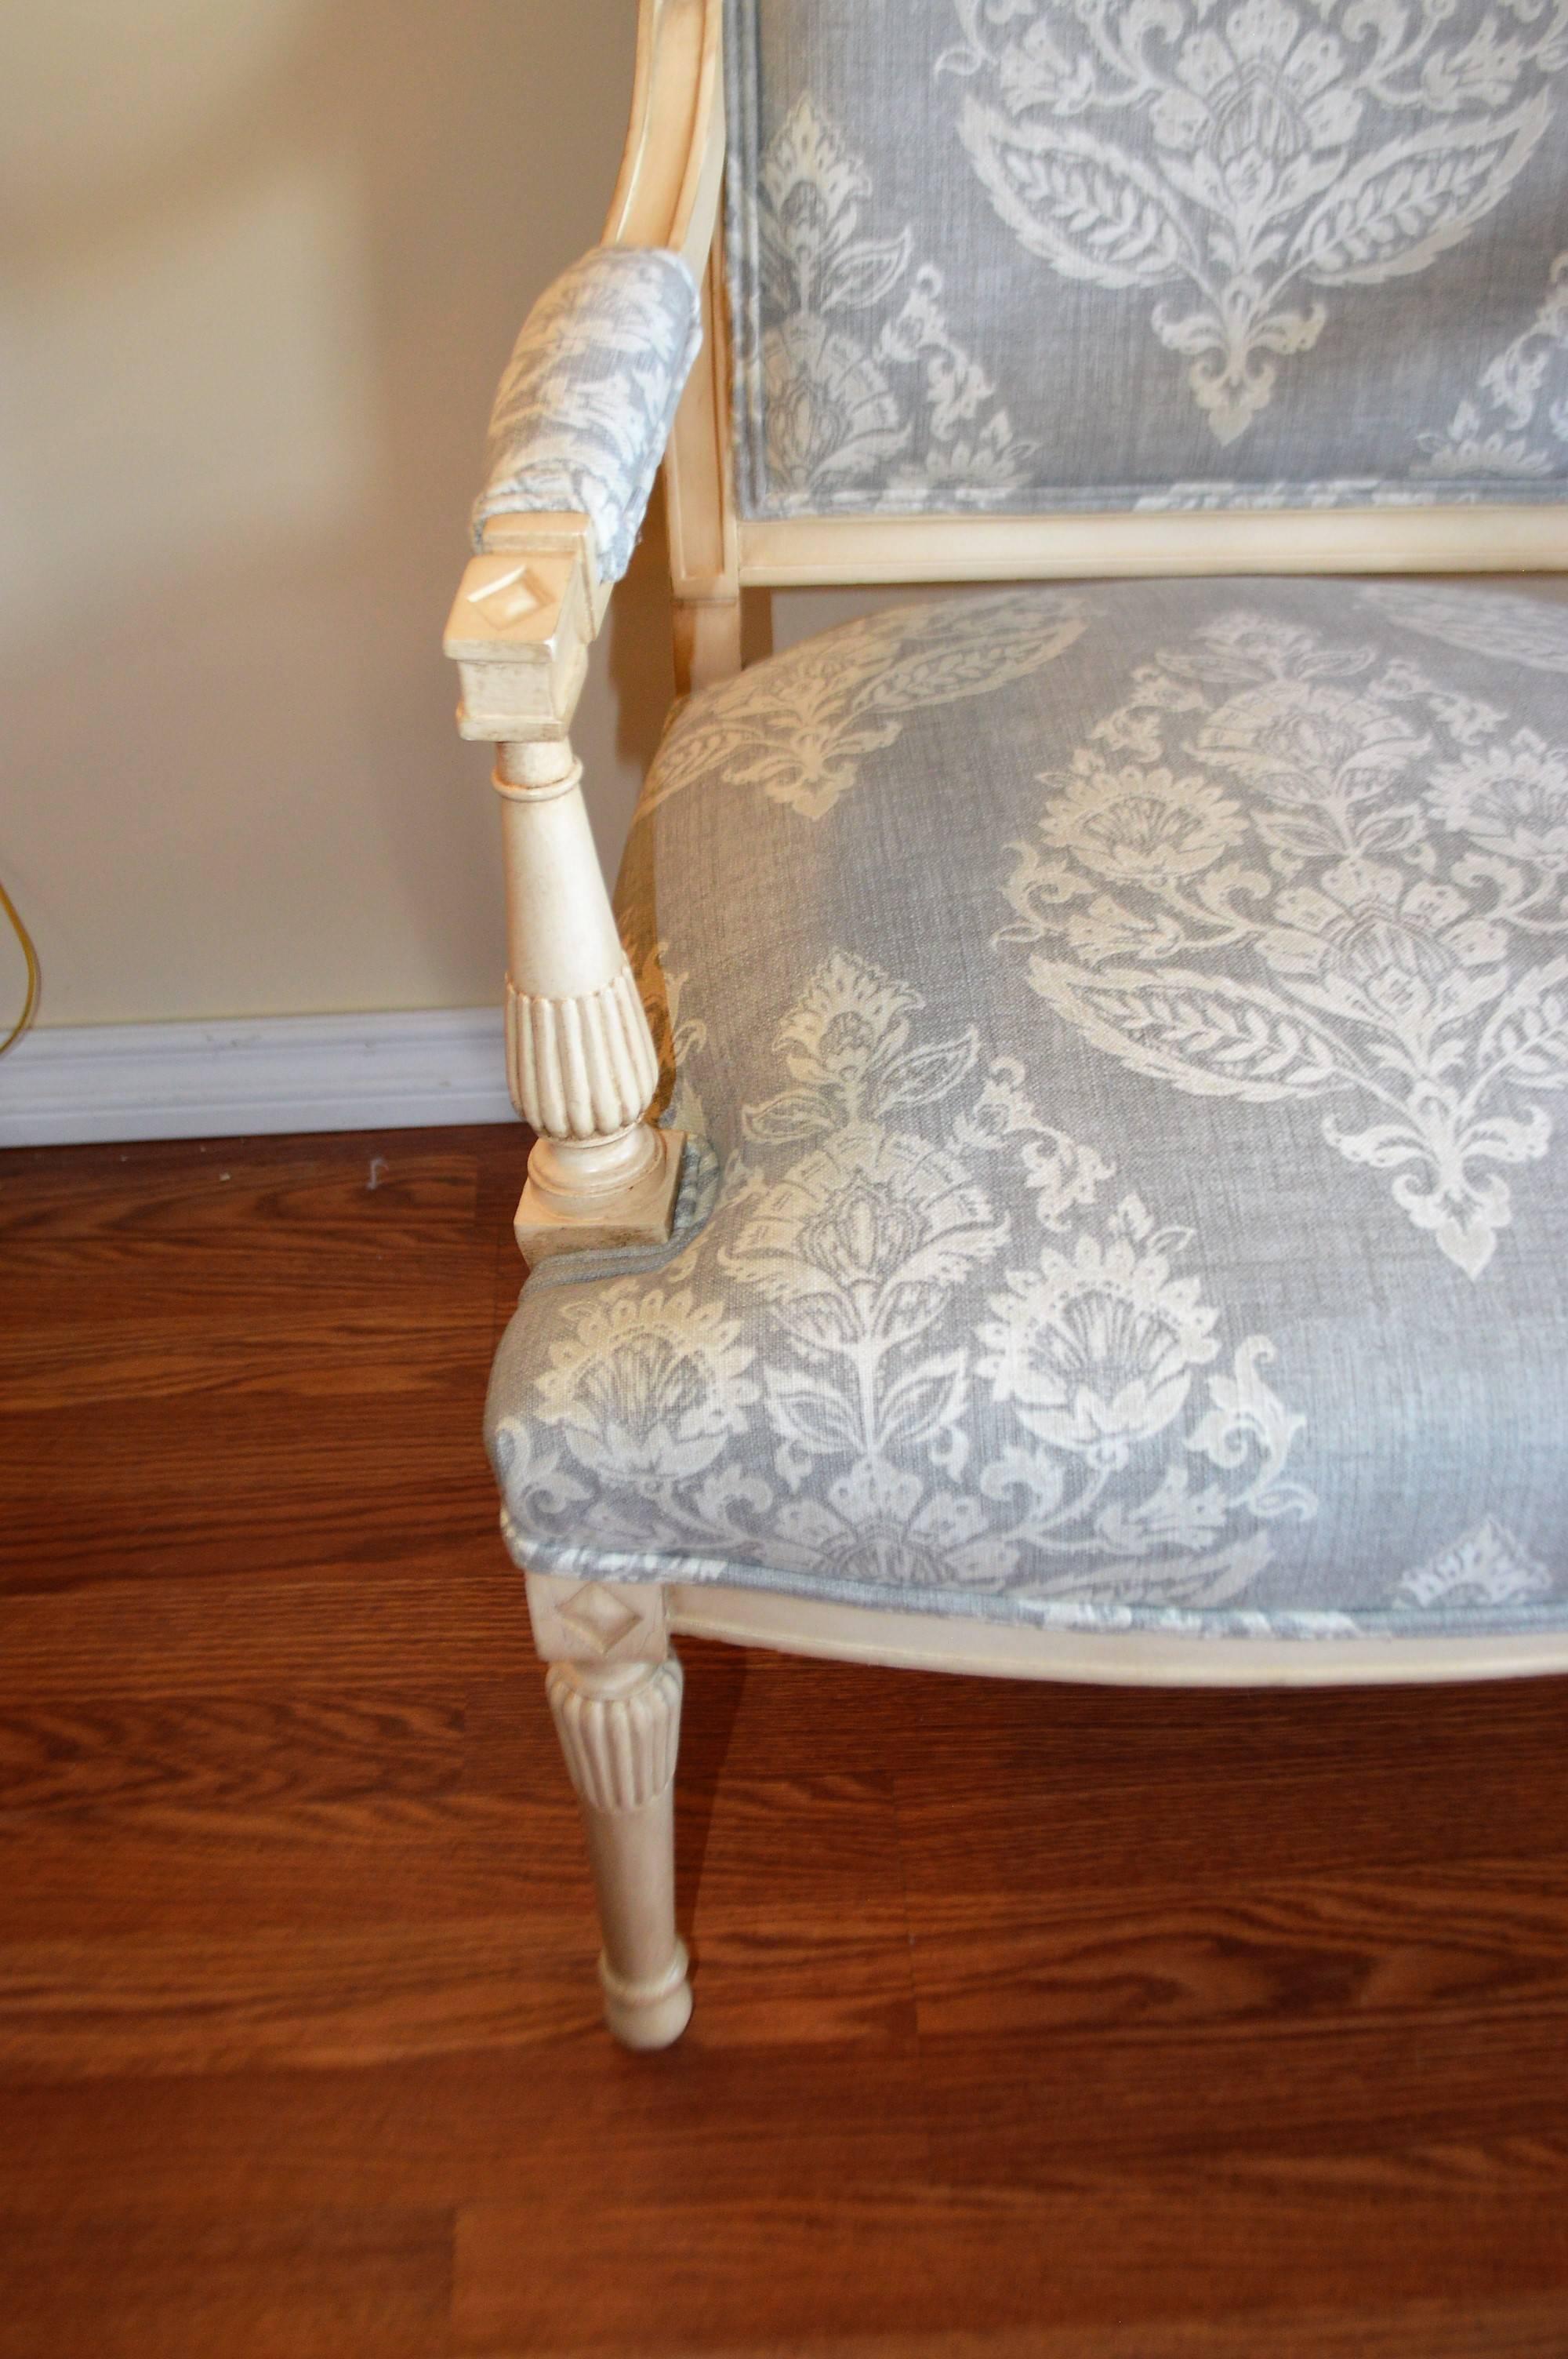 Pair of Gustavian style armchairs from France, circa 1920 painted in light cream and newly upholstered in damask pattern linen in light grey and off-white.
Very chic, will enhance any room.